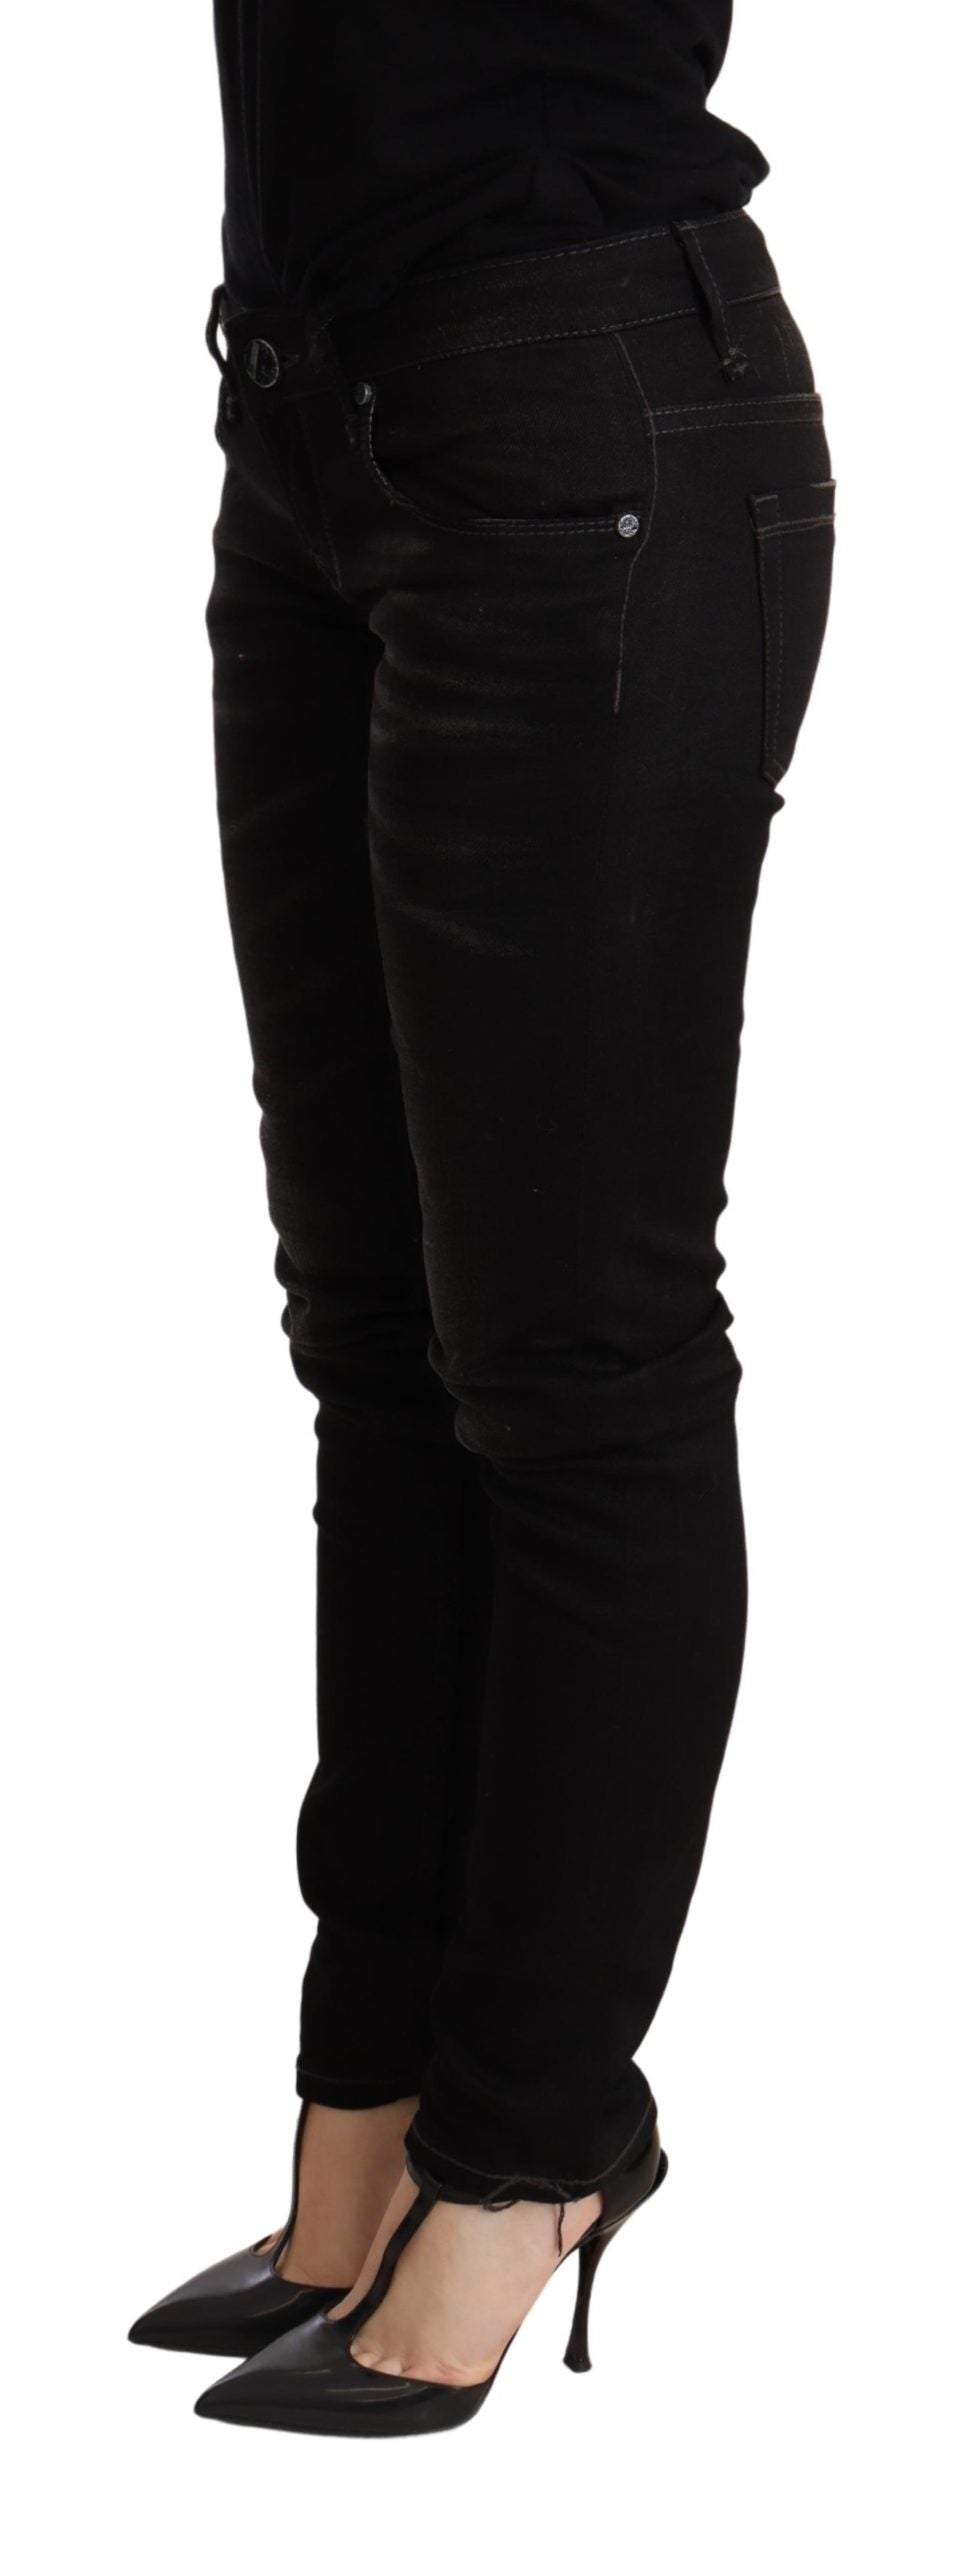 Acht Black Low Waist Skinny Denim Trouser Acht, Black, feed-agegroup-adult, feed-color-Black, feed-gender-female, Jeans & Pants - Women - Clothing, W26 at SEYMAYKA